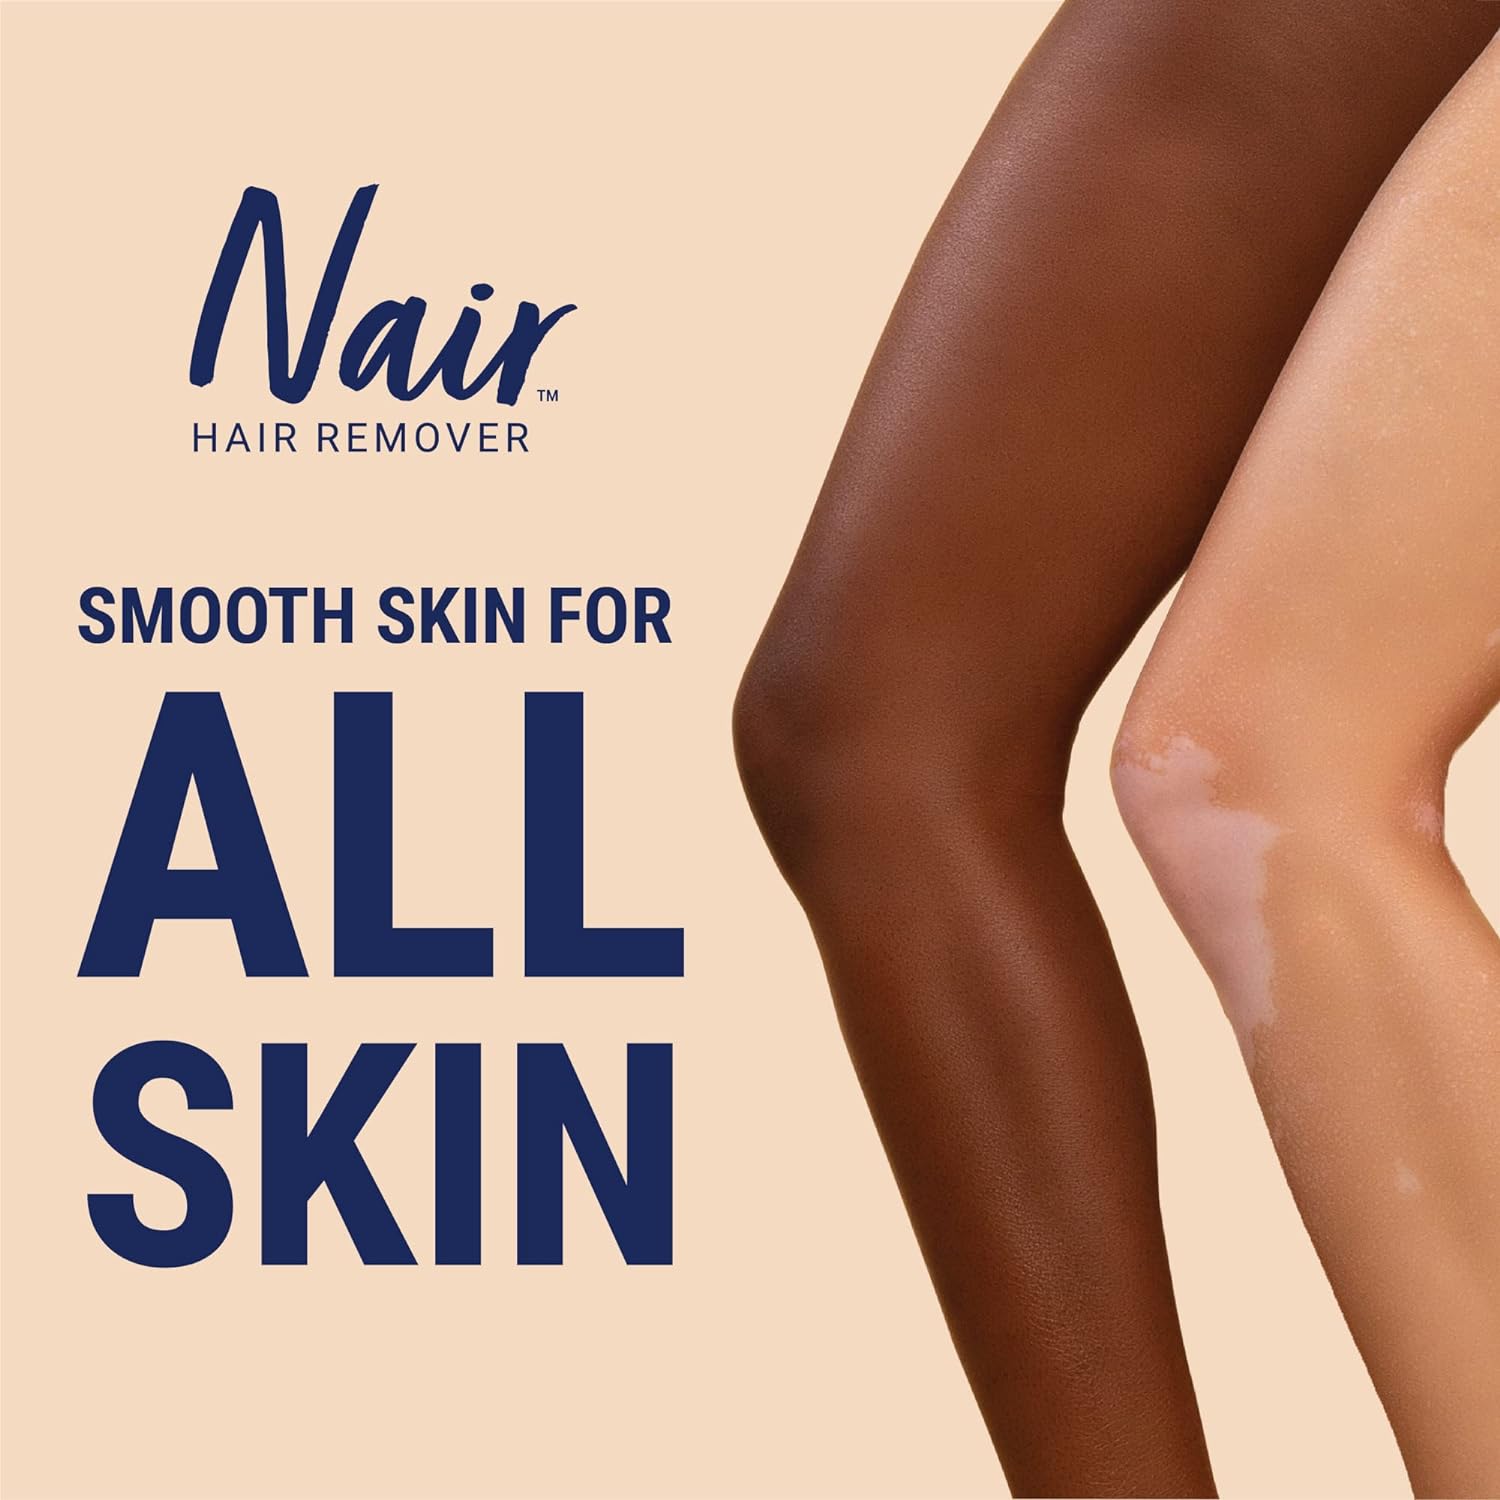 Nair Hair Remover Moisturizing Face Cream, with Sweet Almond Oil, 2OZ : Facial Care Products : Beauty & Personal Care